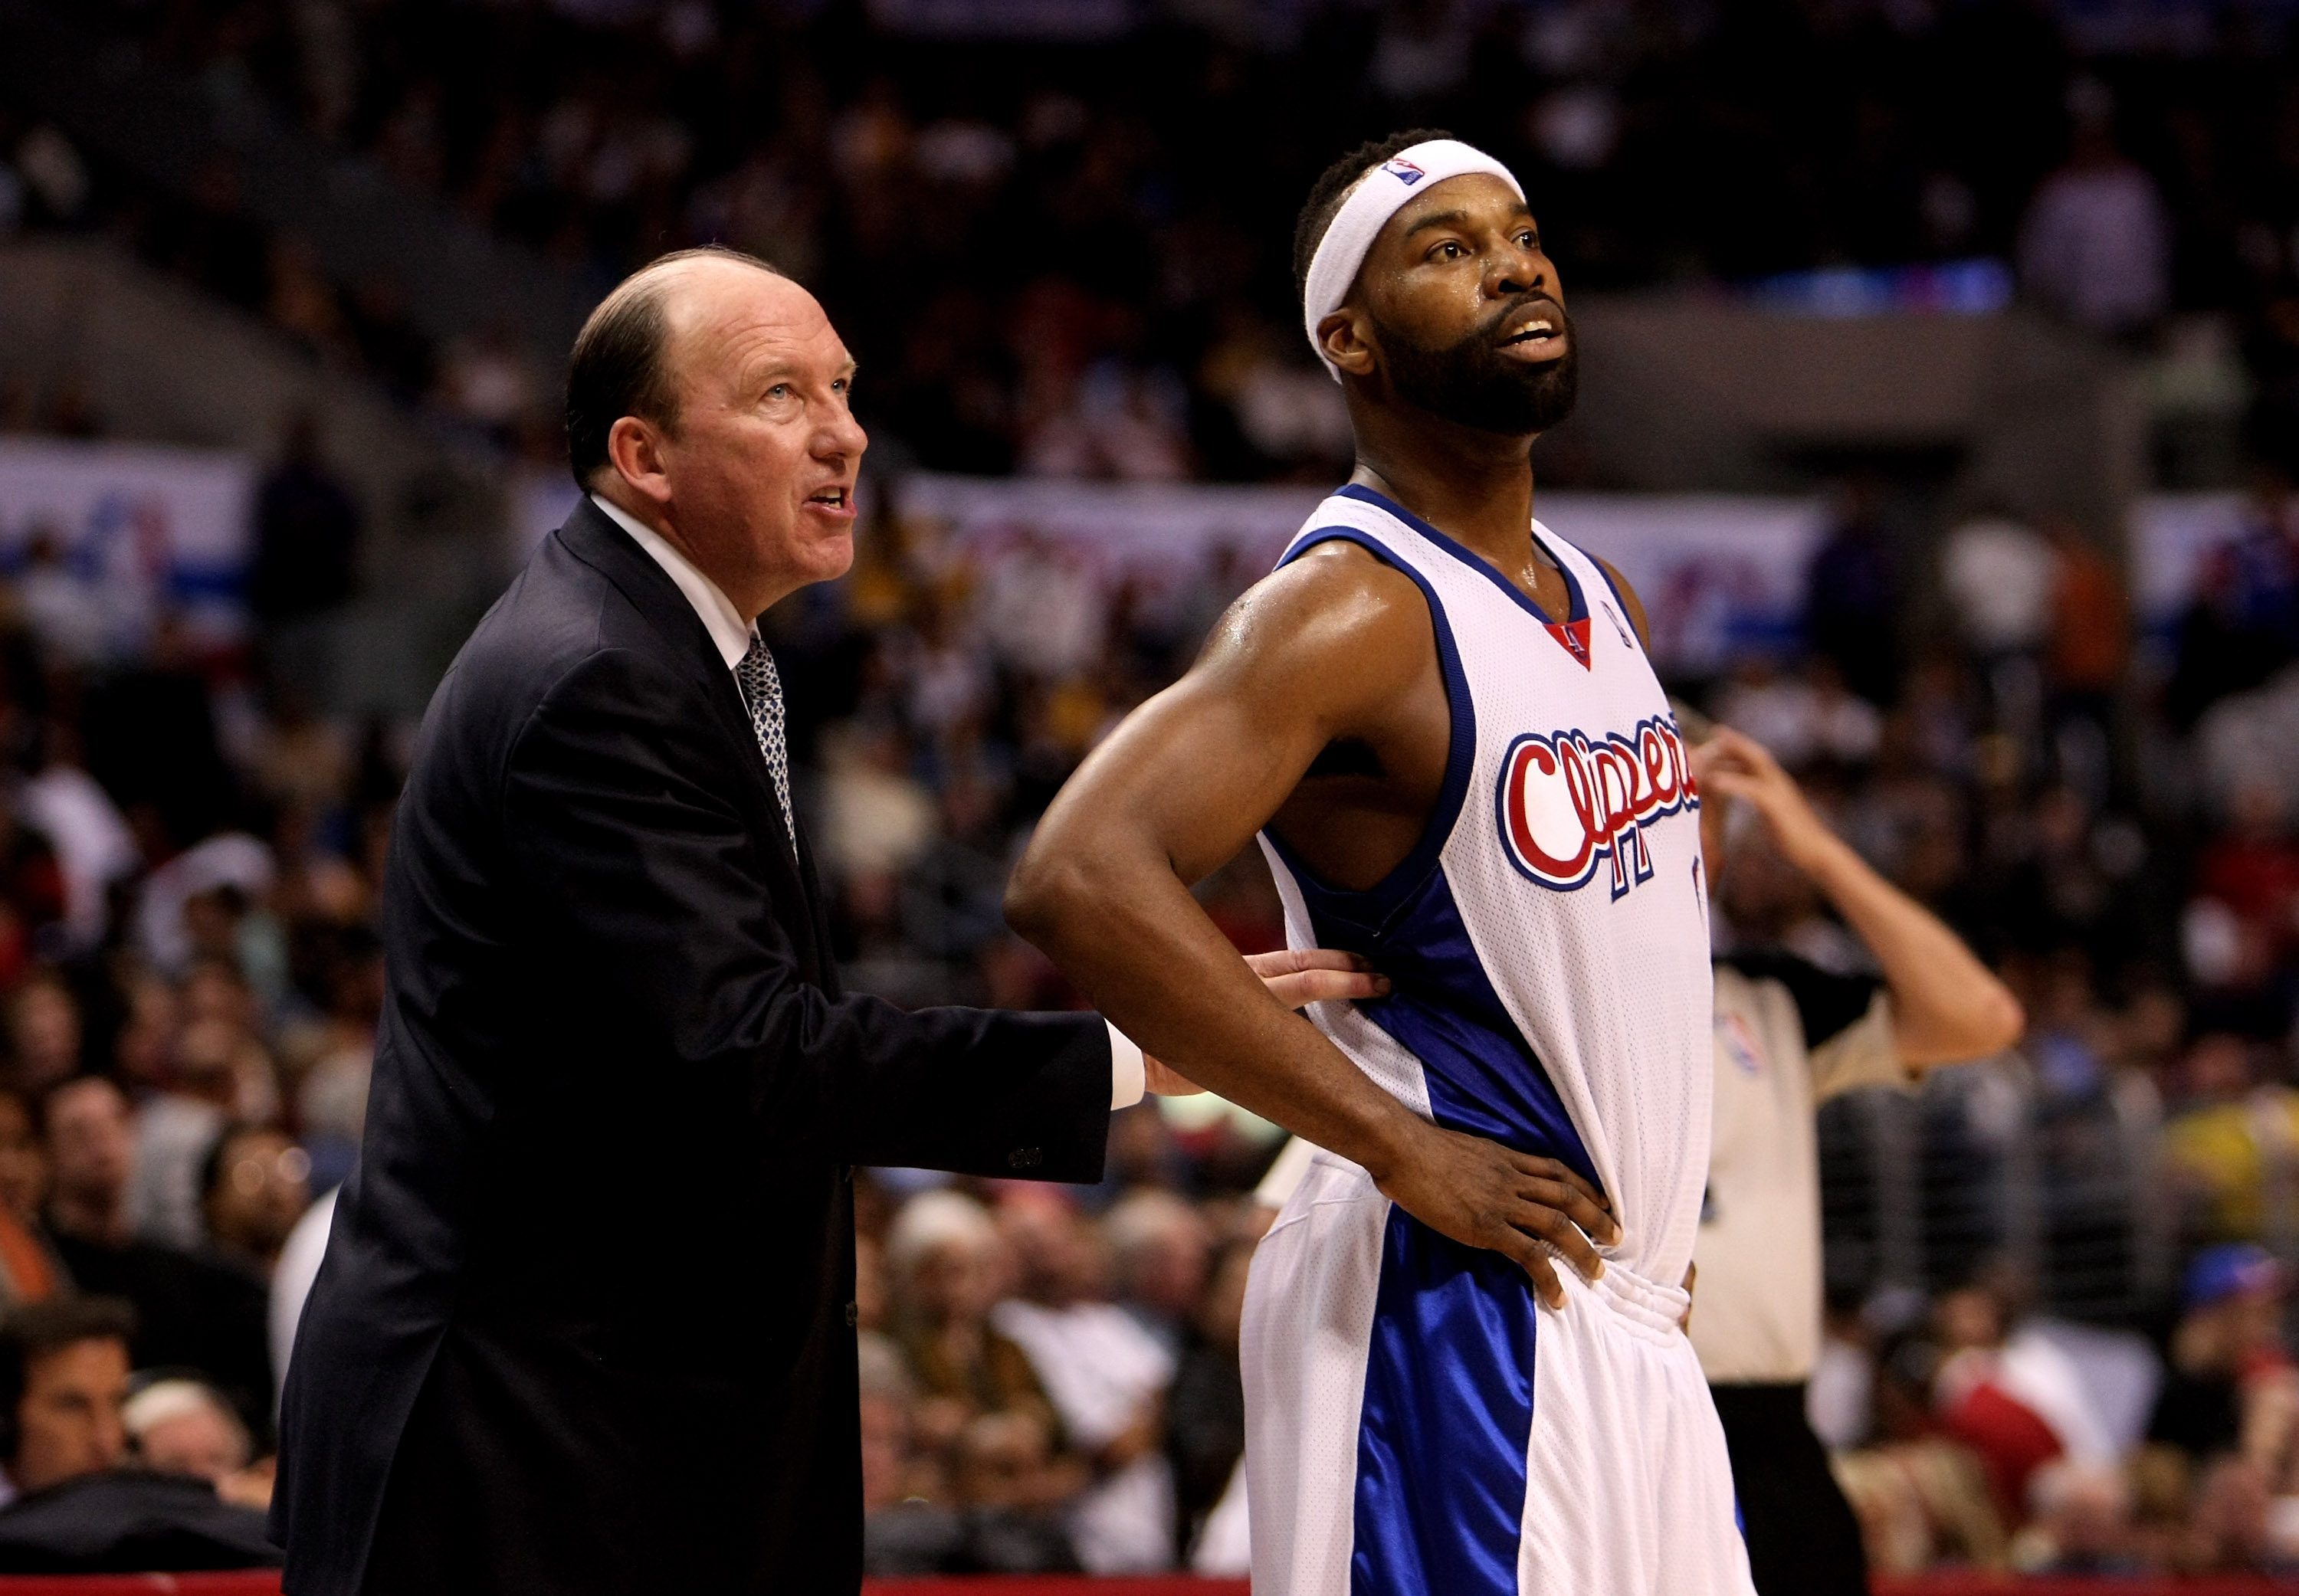 LOS ANGELES, CA - JANUARY 06:  Baron Davis #1 and head coach Mike Dunleavy of the Los Angeles Clippers confer during the game with the Los Angeles Lakers on January 6, 2010 at Staples Center in Los Angeles, California.  The Clippers won 102-91.   NOTE TO